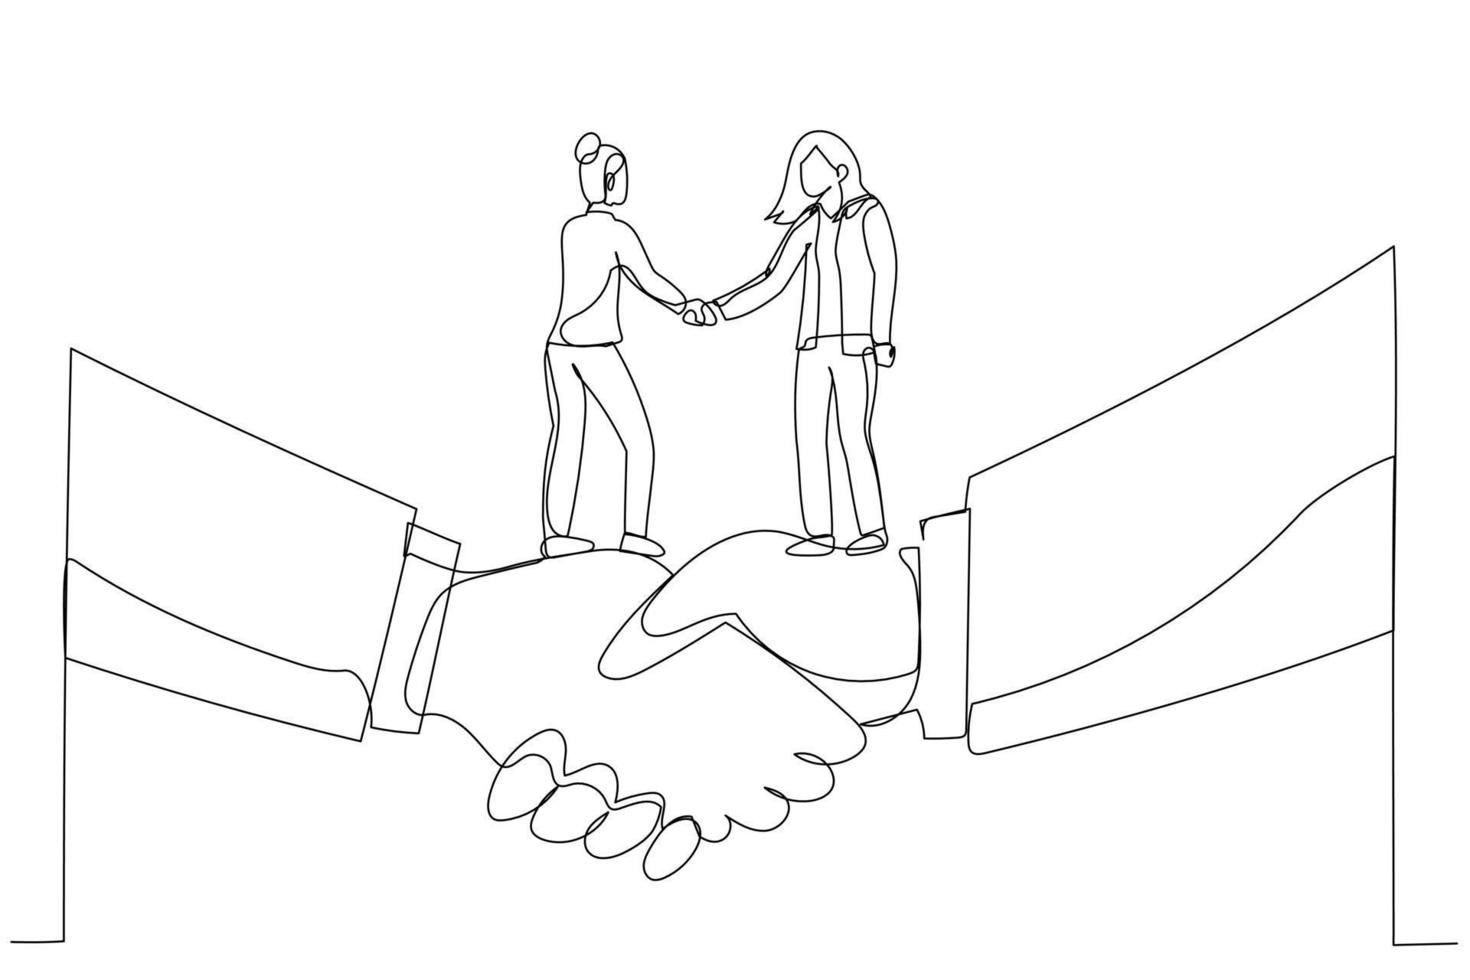 Cartoon of businesswoman shaking hands and making deal standing on giant hand. Metaphor for small and big business. One line art style vector